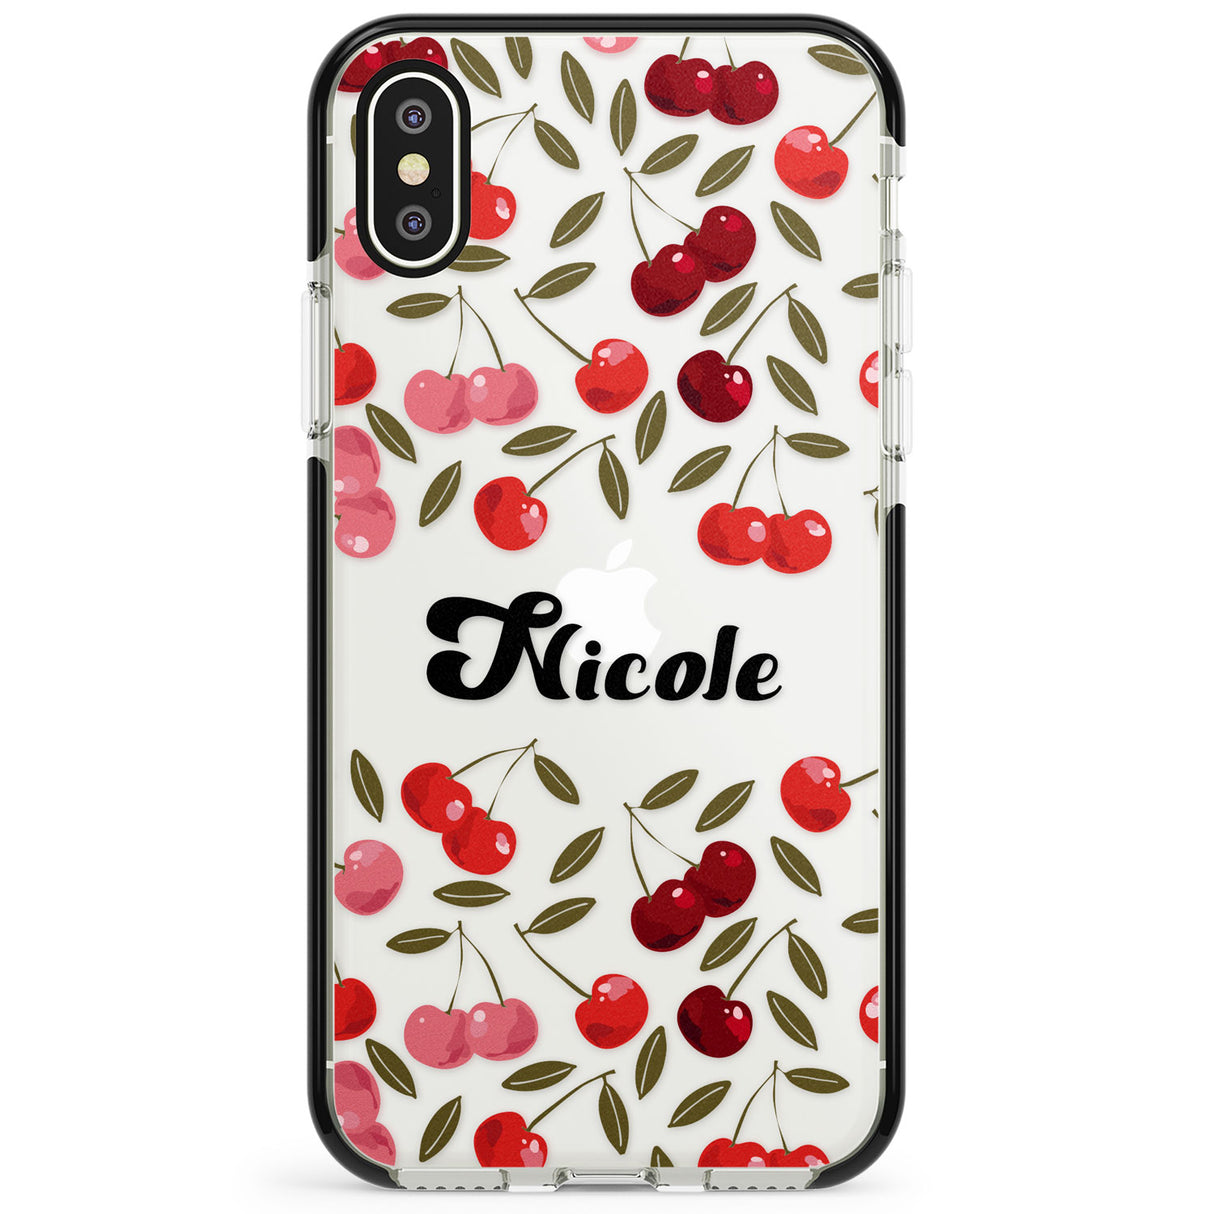 Personalised Cherry Pattern Phone Case for iPhone X XS Max XR